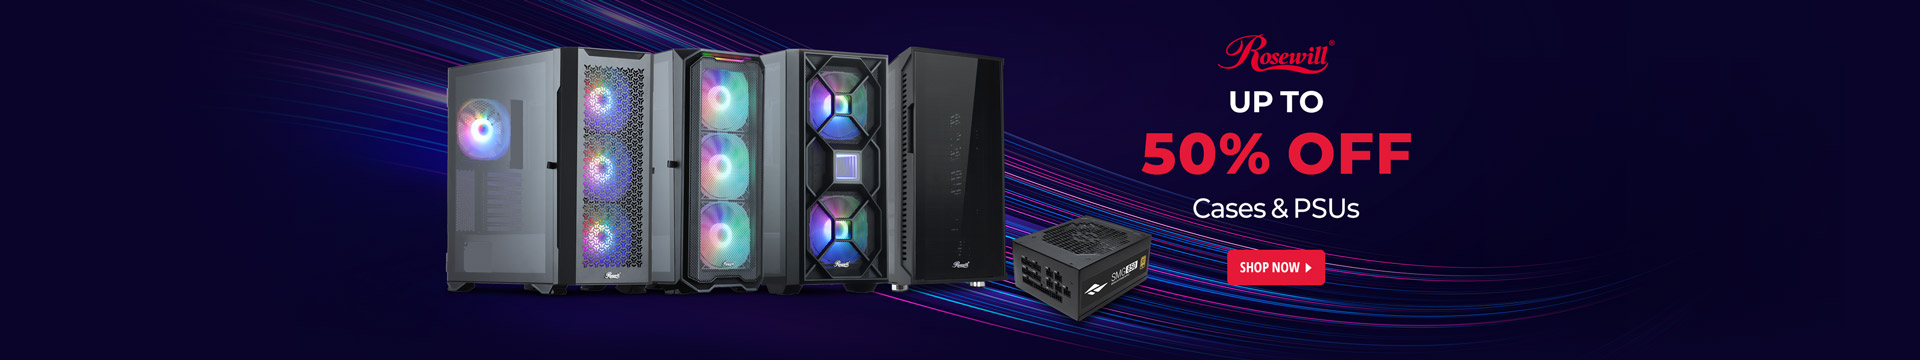 Up to 50% off Cases & PSUs